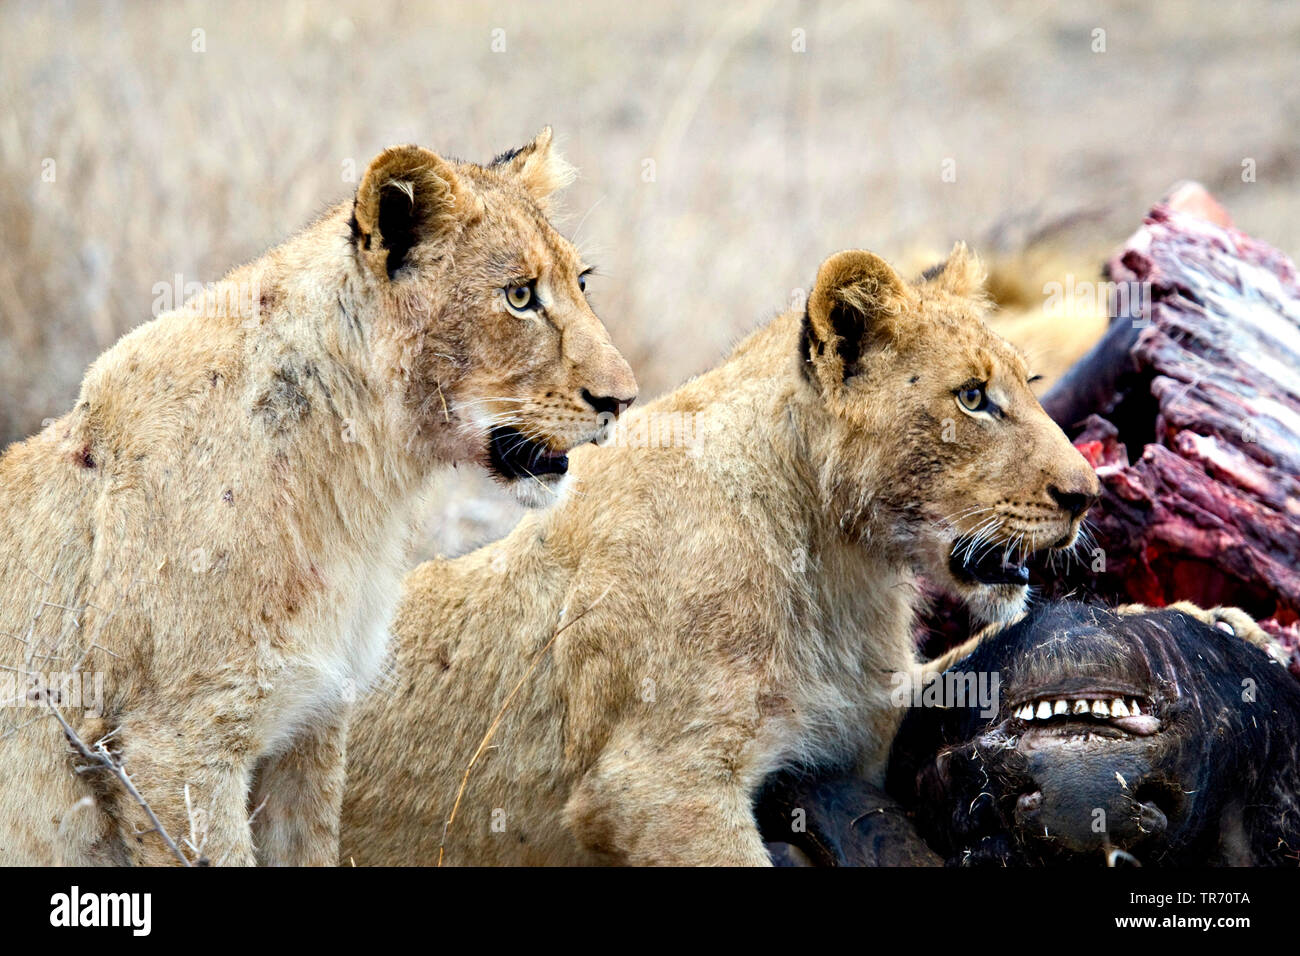 lion (Panthera leo), young lions eating the pray, South Africa, Krueger National Park Stock Photo